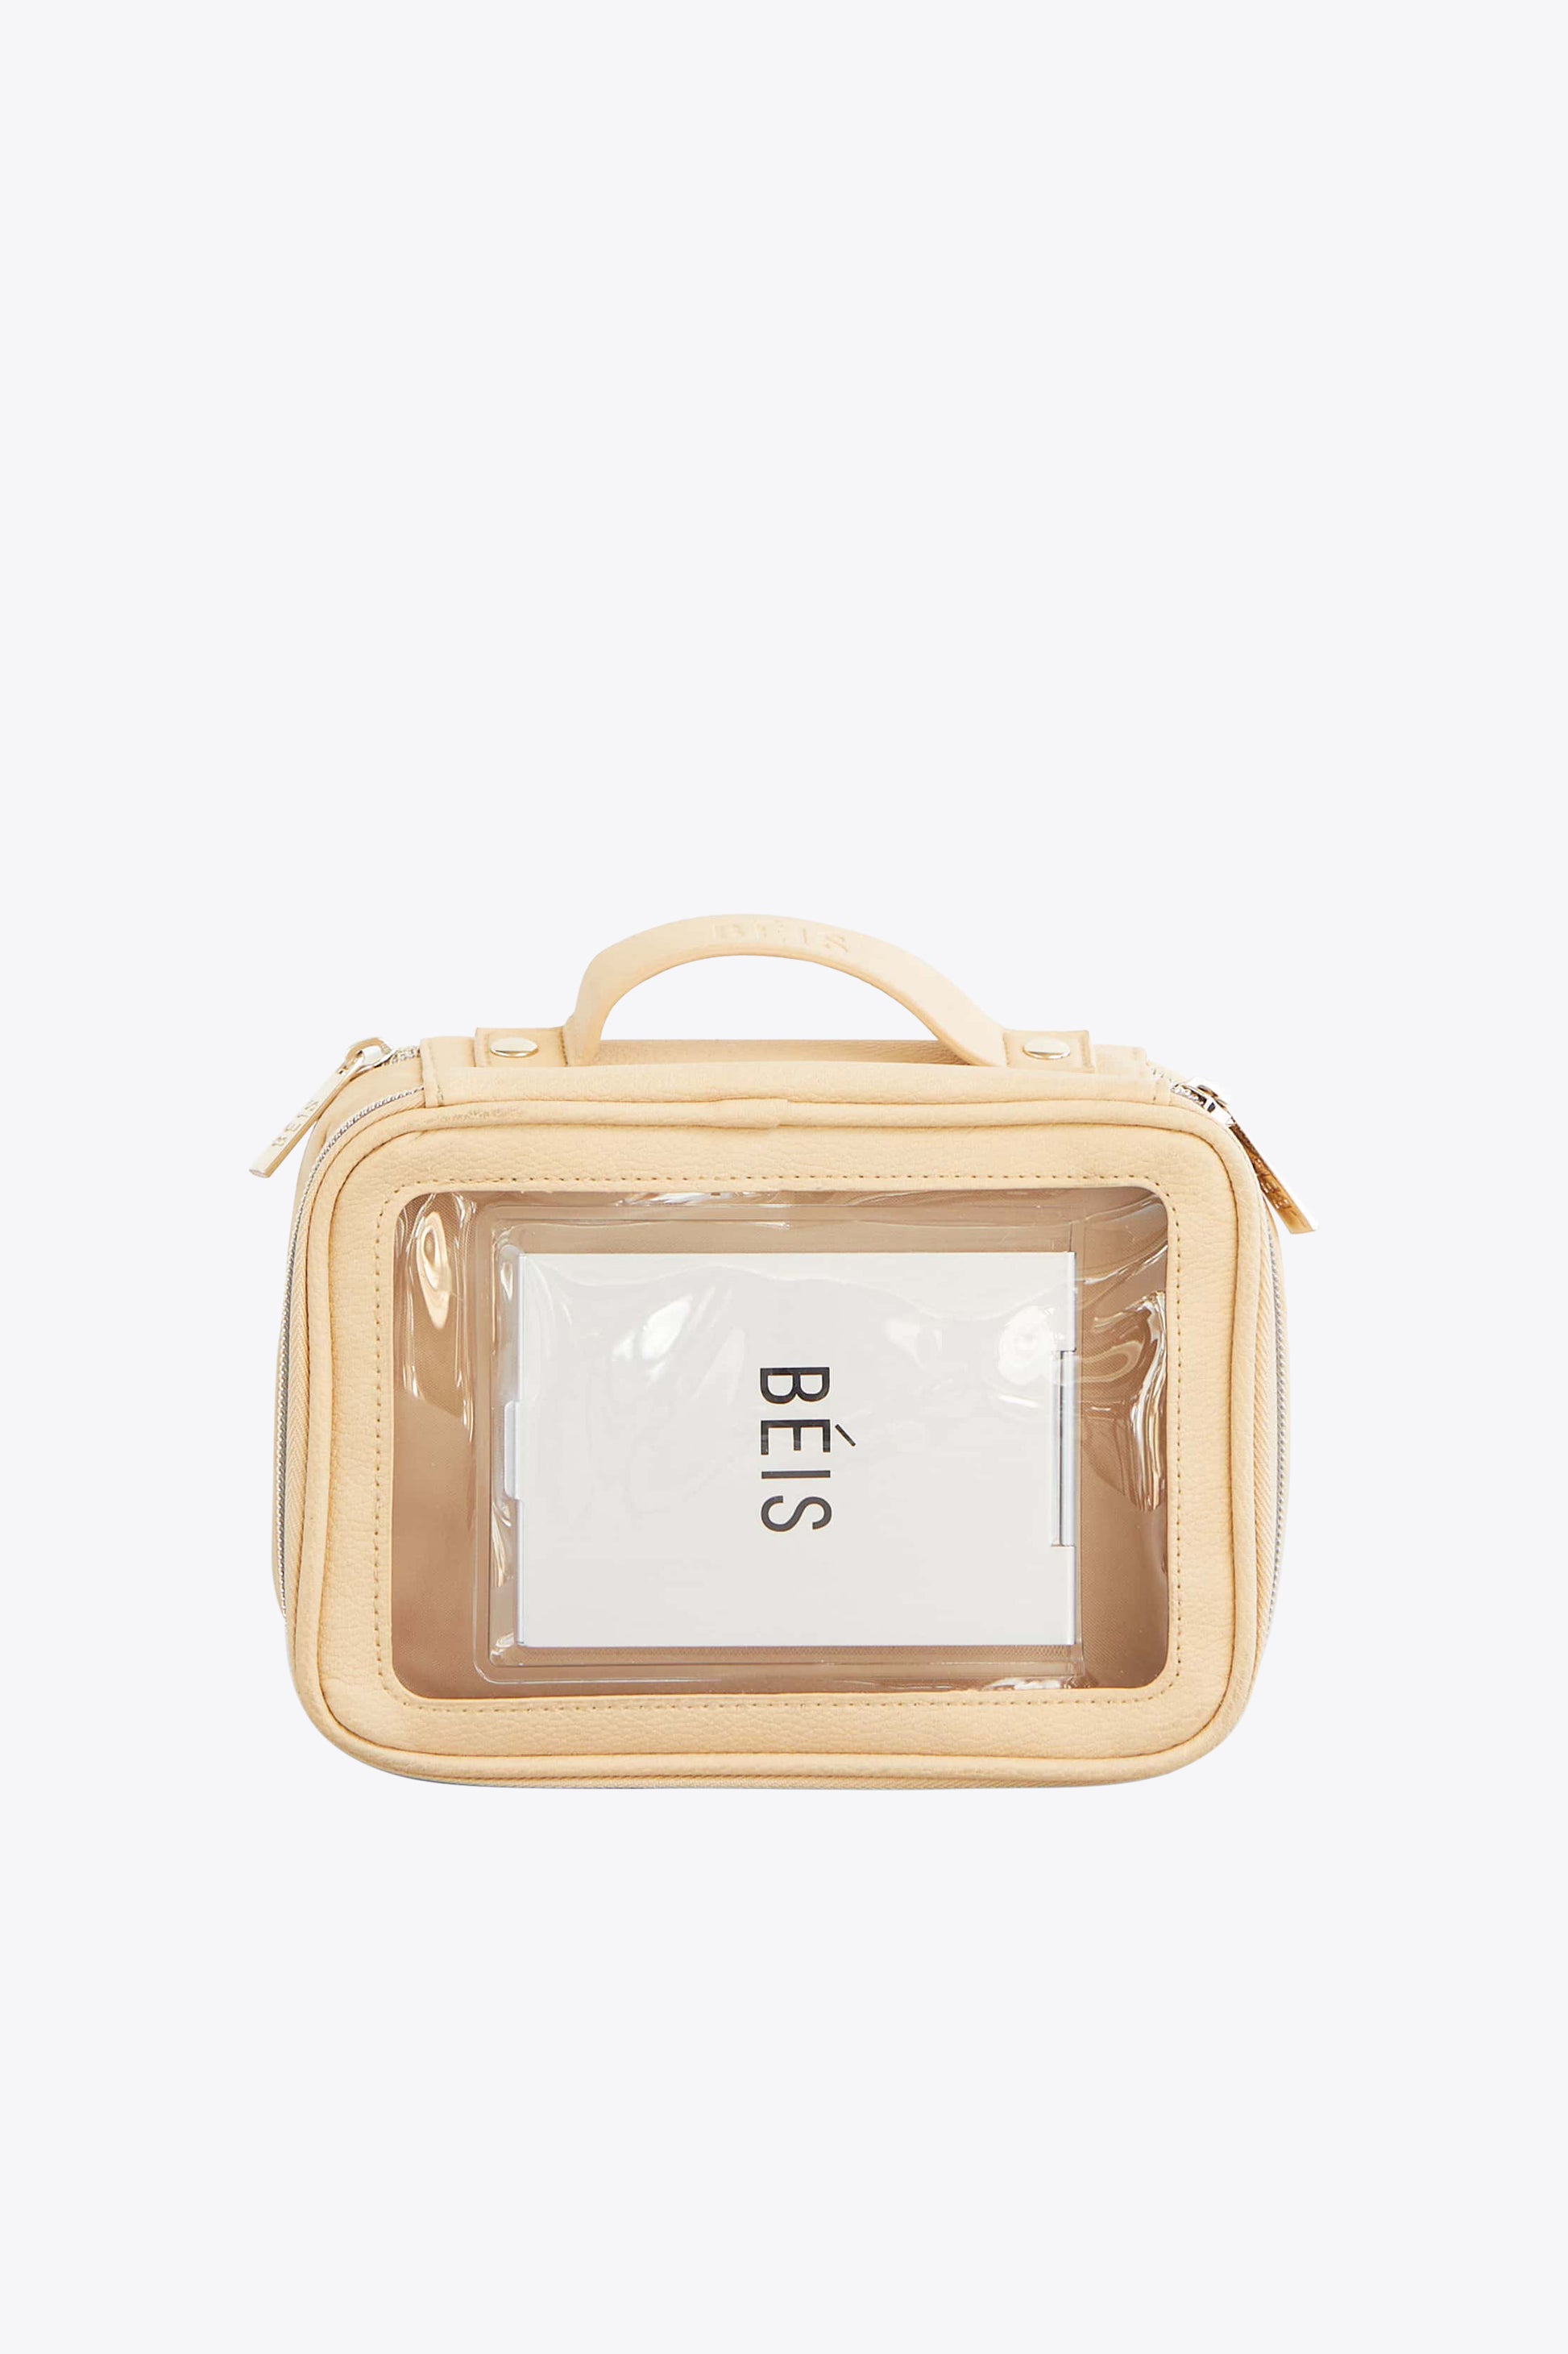 Béis Travel The Cosmetic Pouch Set in Beige